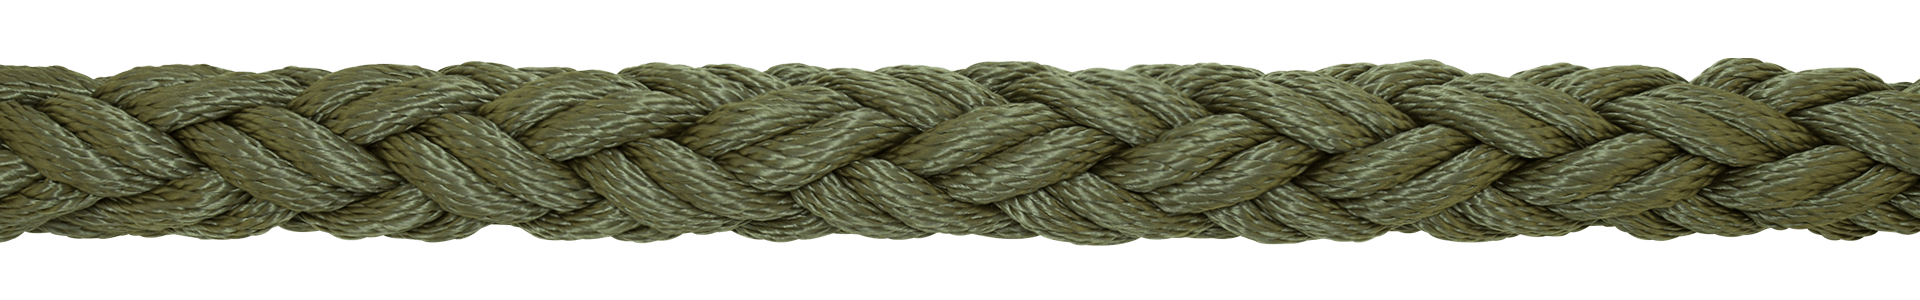 Fast Rope for Special Forces Personnel Insertion and Extraction - China  Spie Rope and Fast Rope Manufactory price